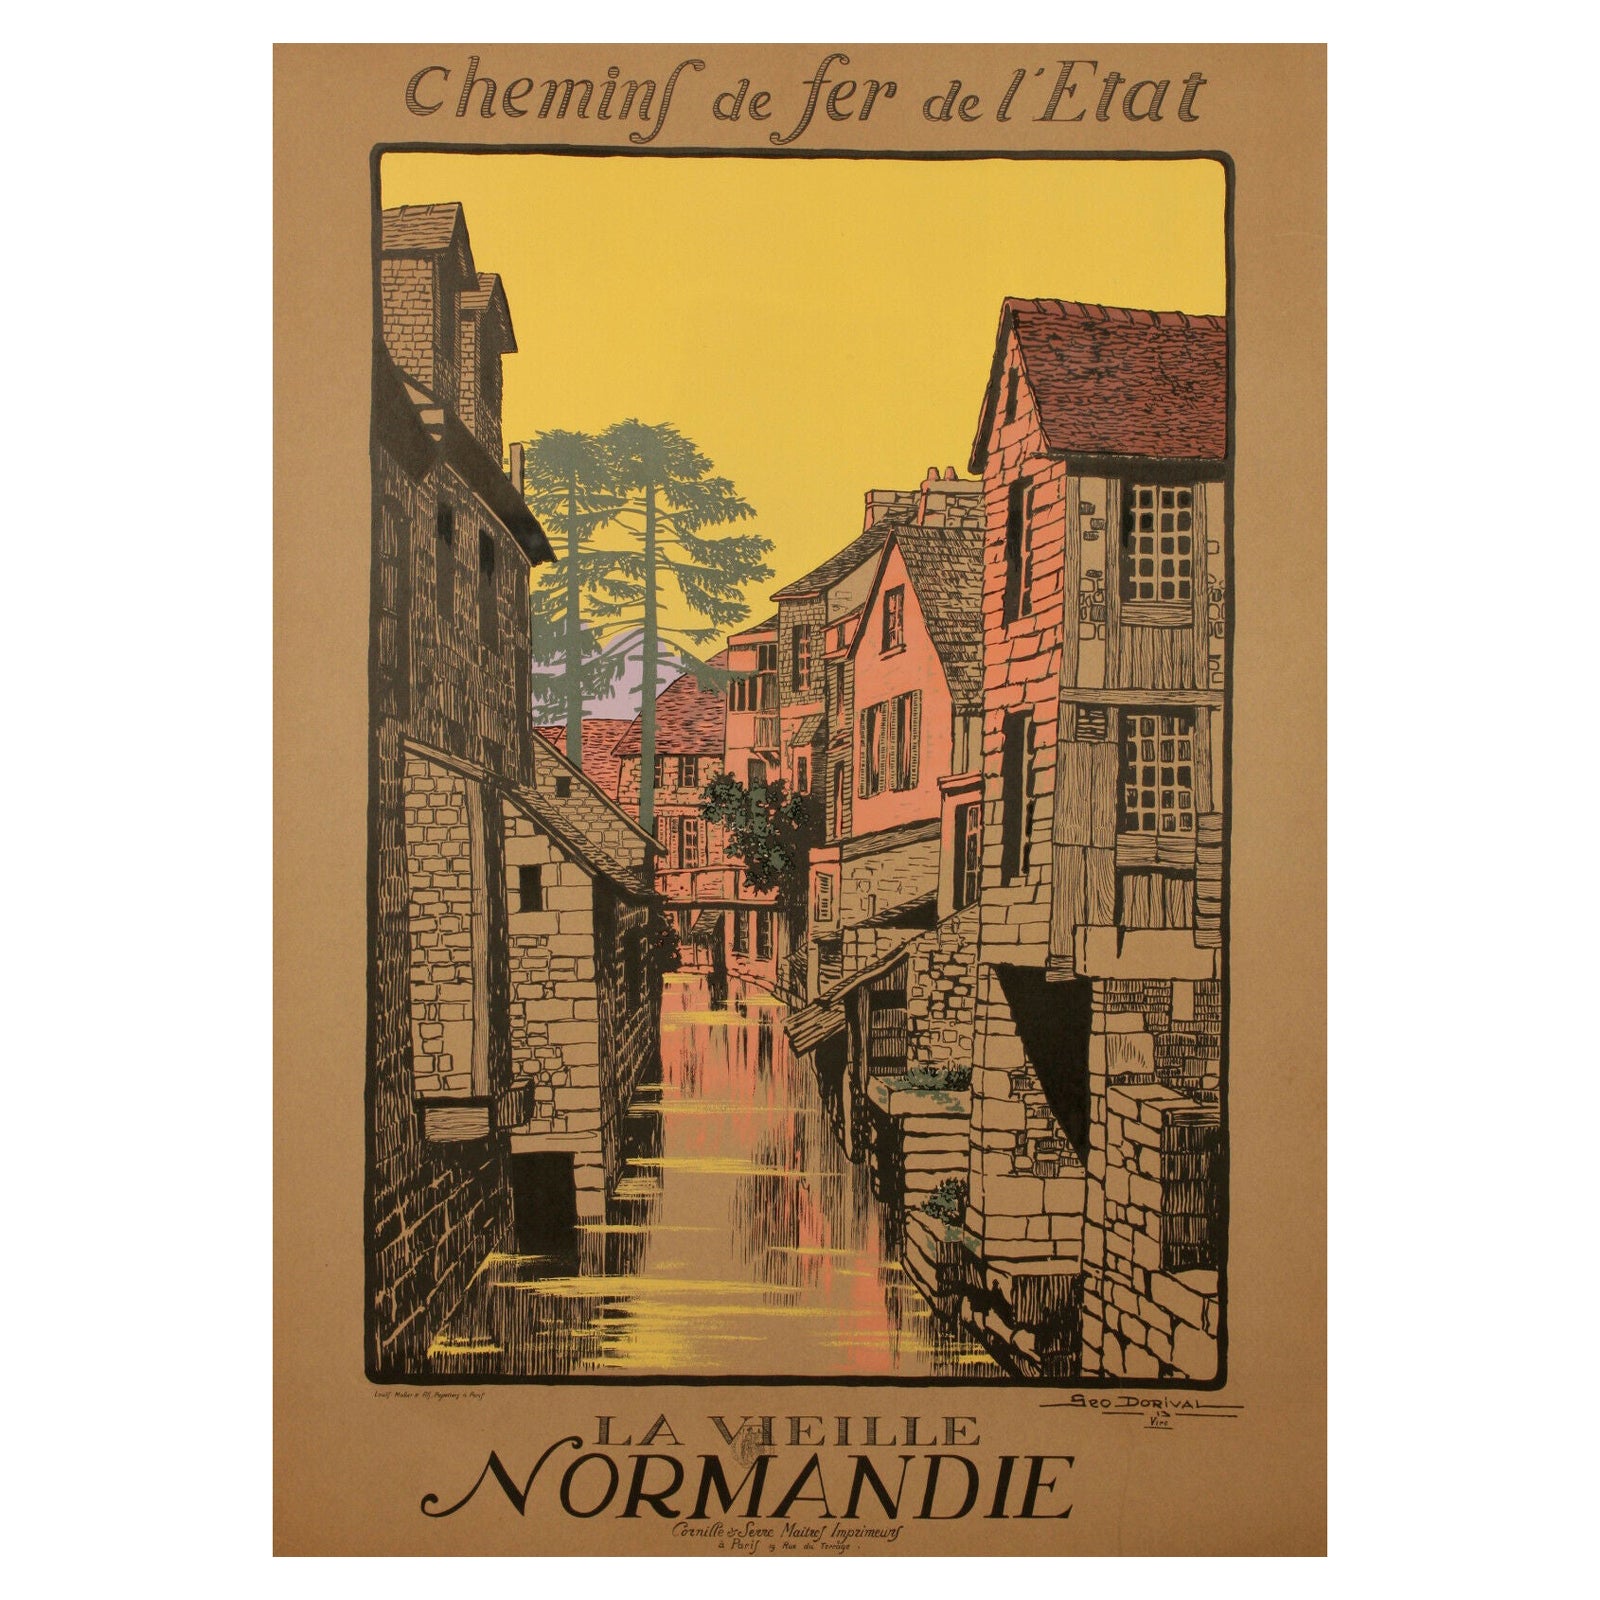 The Old Normandy, Poster by Géo Dorival